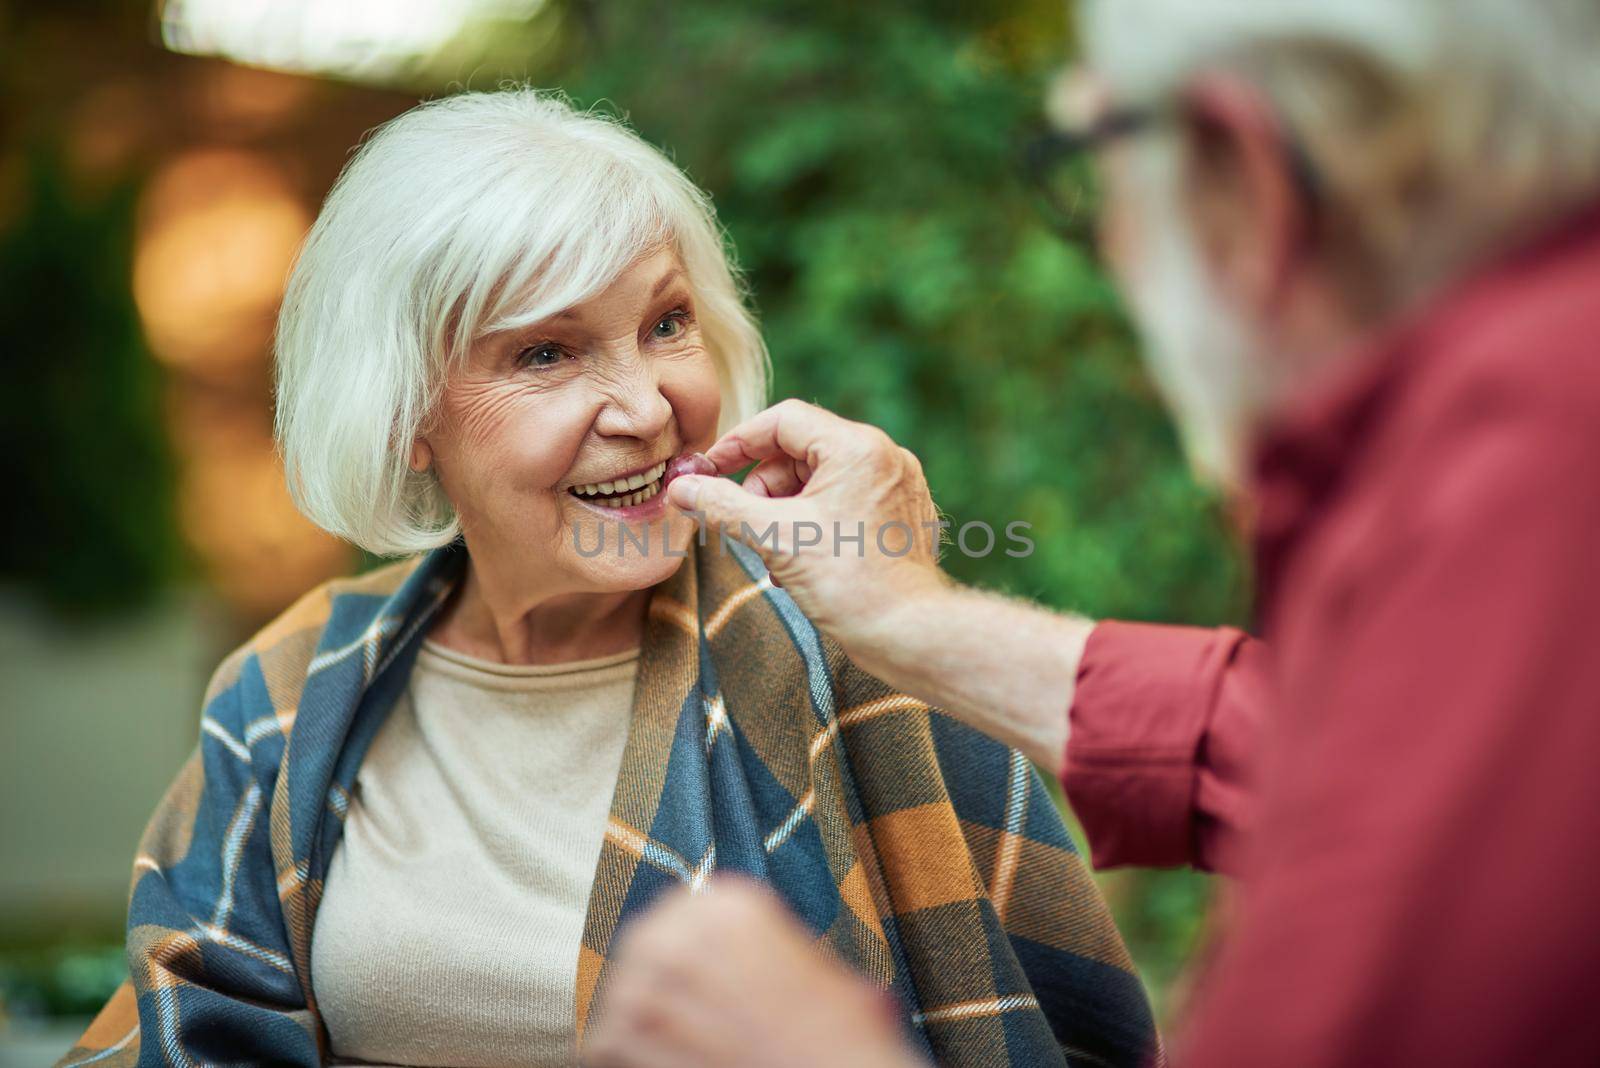 Cropped photo of elderly man treating his wife to grapes while sitting together outdoors. Relationship and family concept